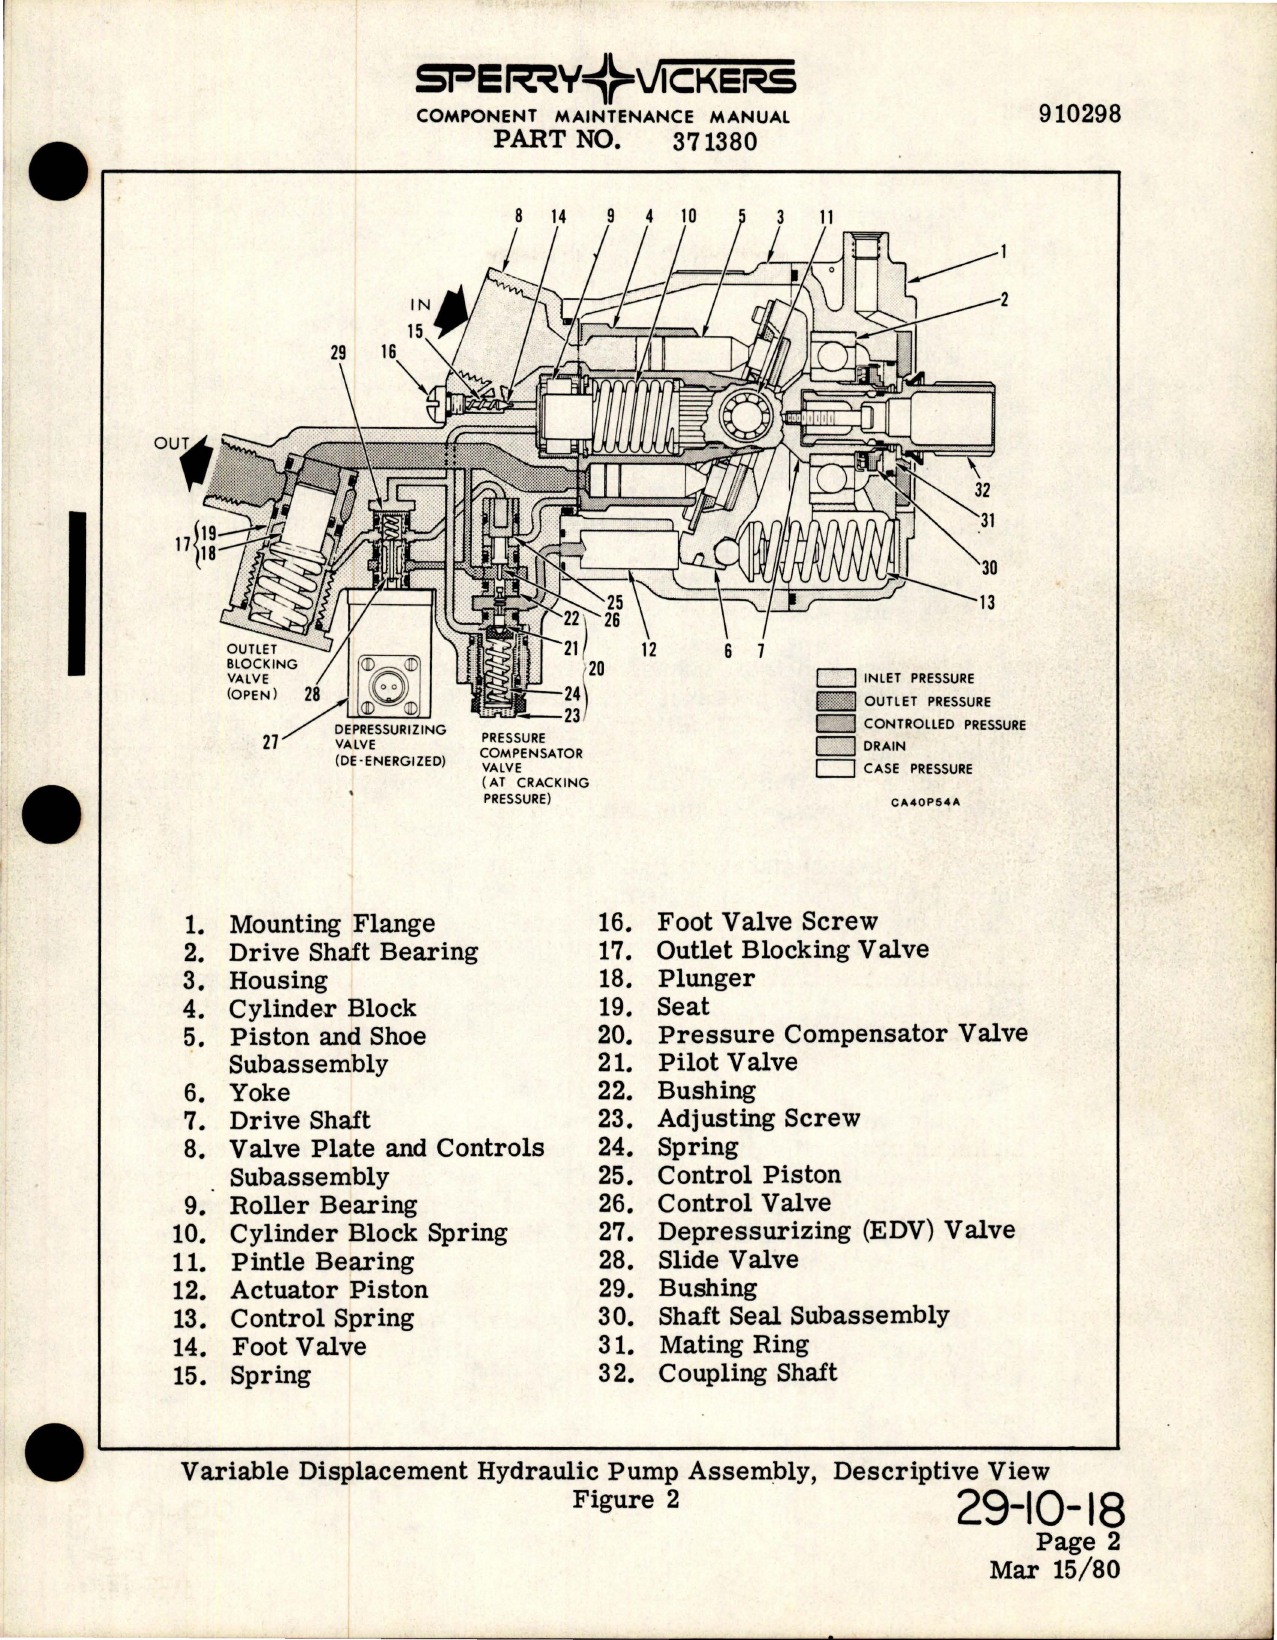 Sample page 9 from AirCorps Library document: Maintenance Manual with Illustrated Parts List for Variable Displacement Hydraulic Pump 